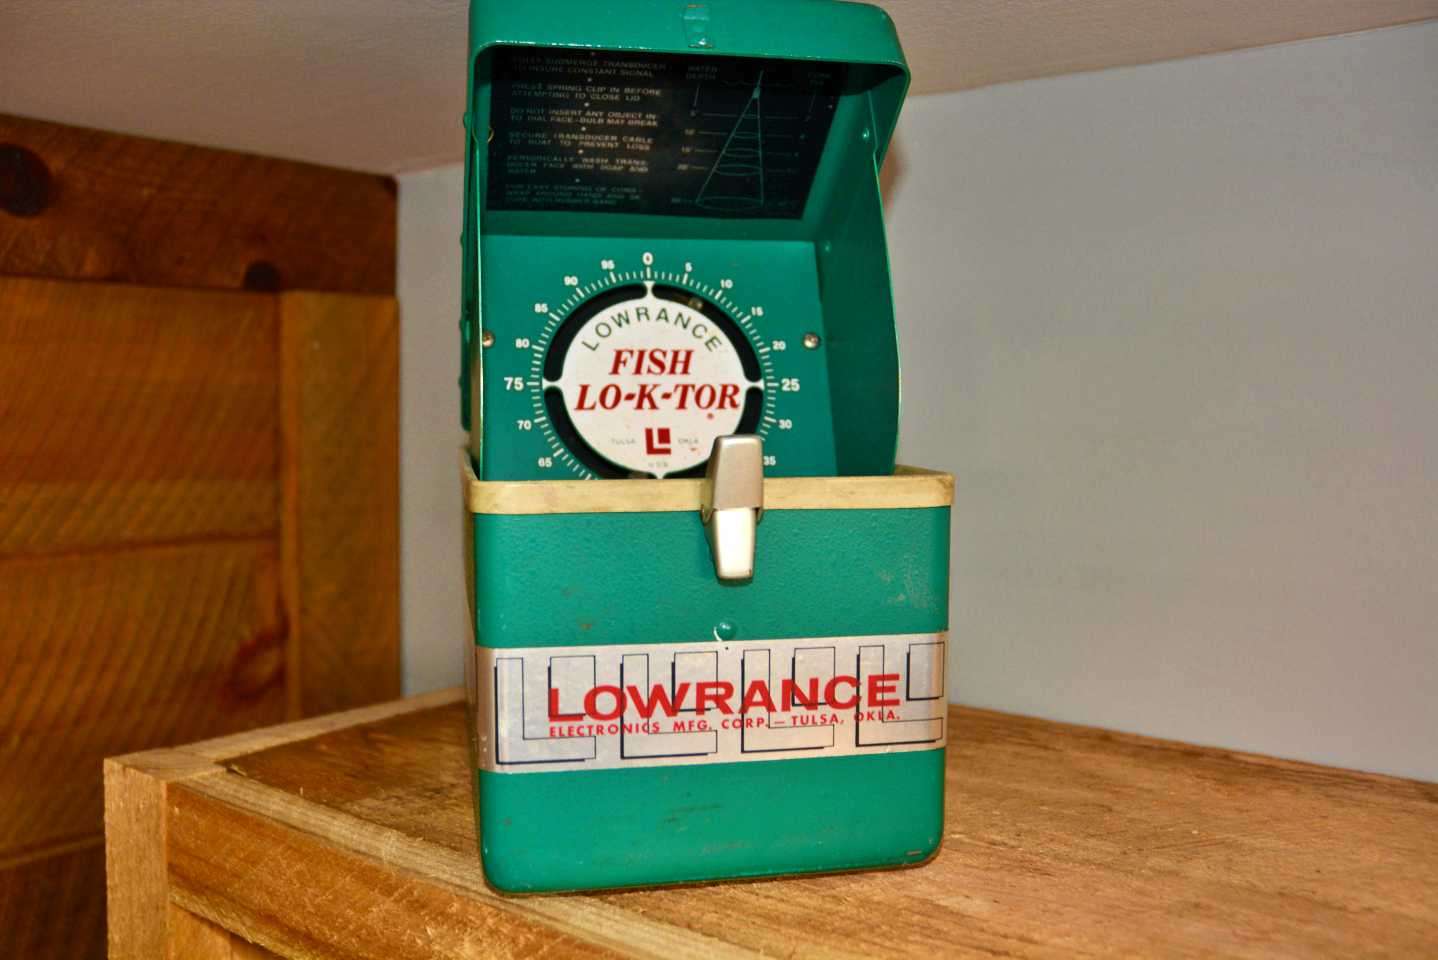 On another shelf is this vintage Lowrance Fish Lo-K-Tor, also known as the classic âGreen Box.â 